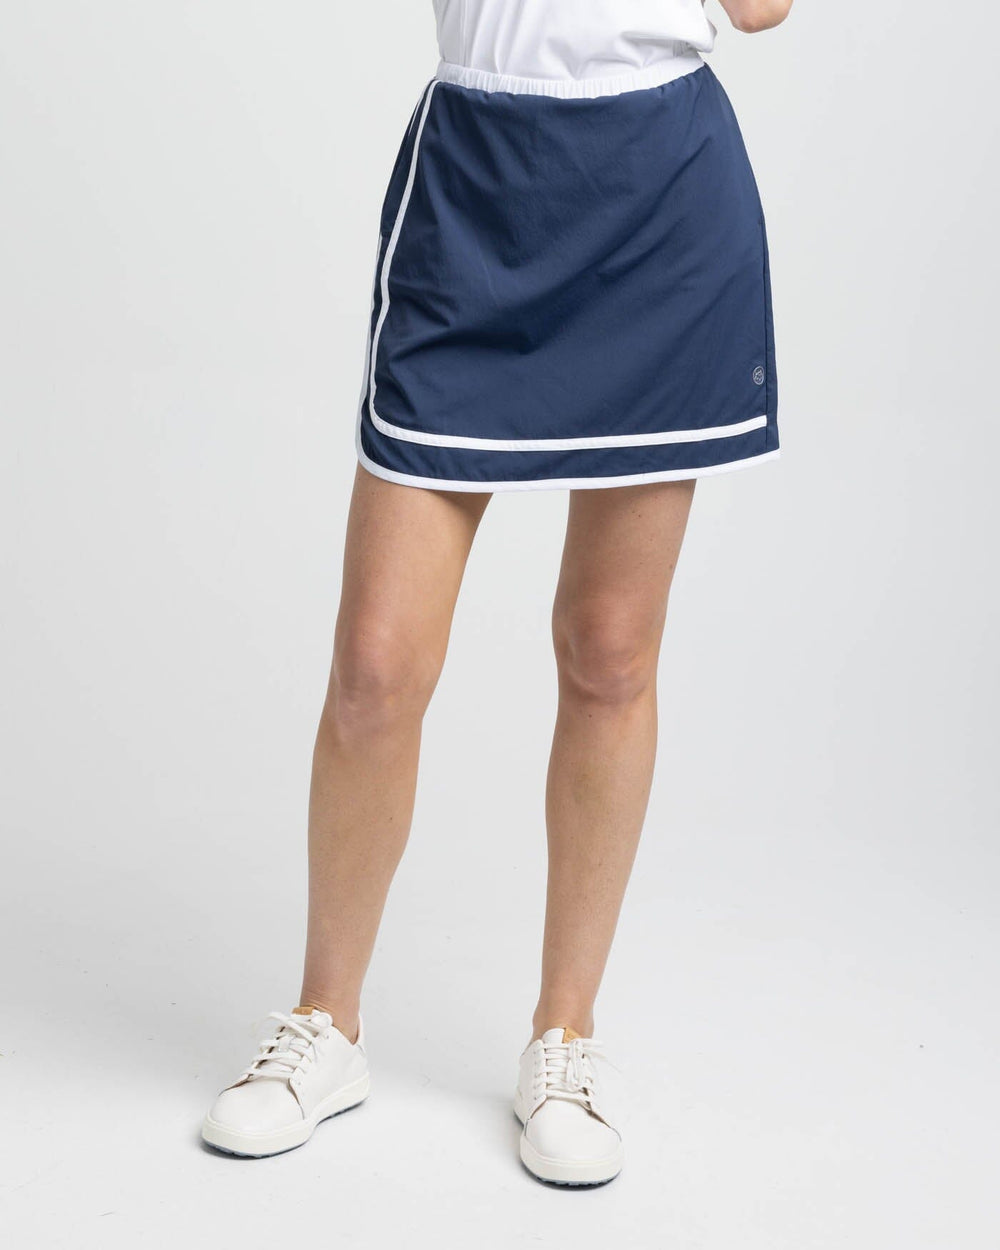 The front view of the Southern Tide Elaina Golf Skort by Southern Tide - Dress Blue